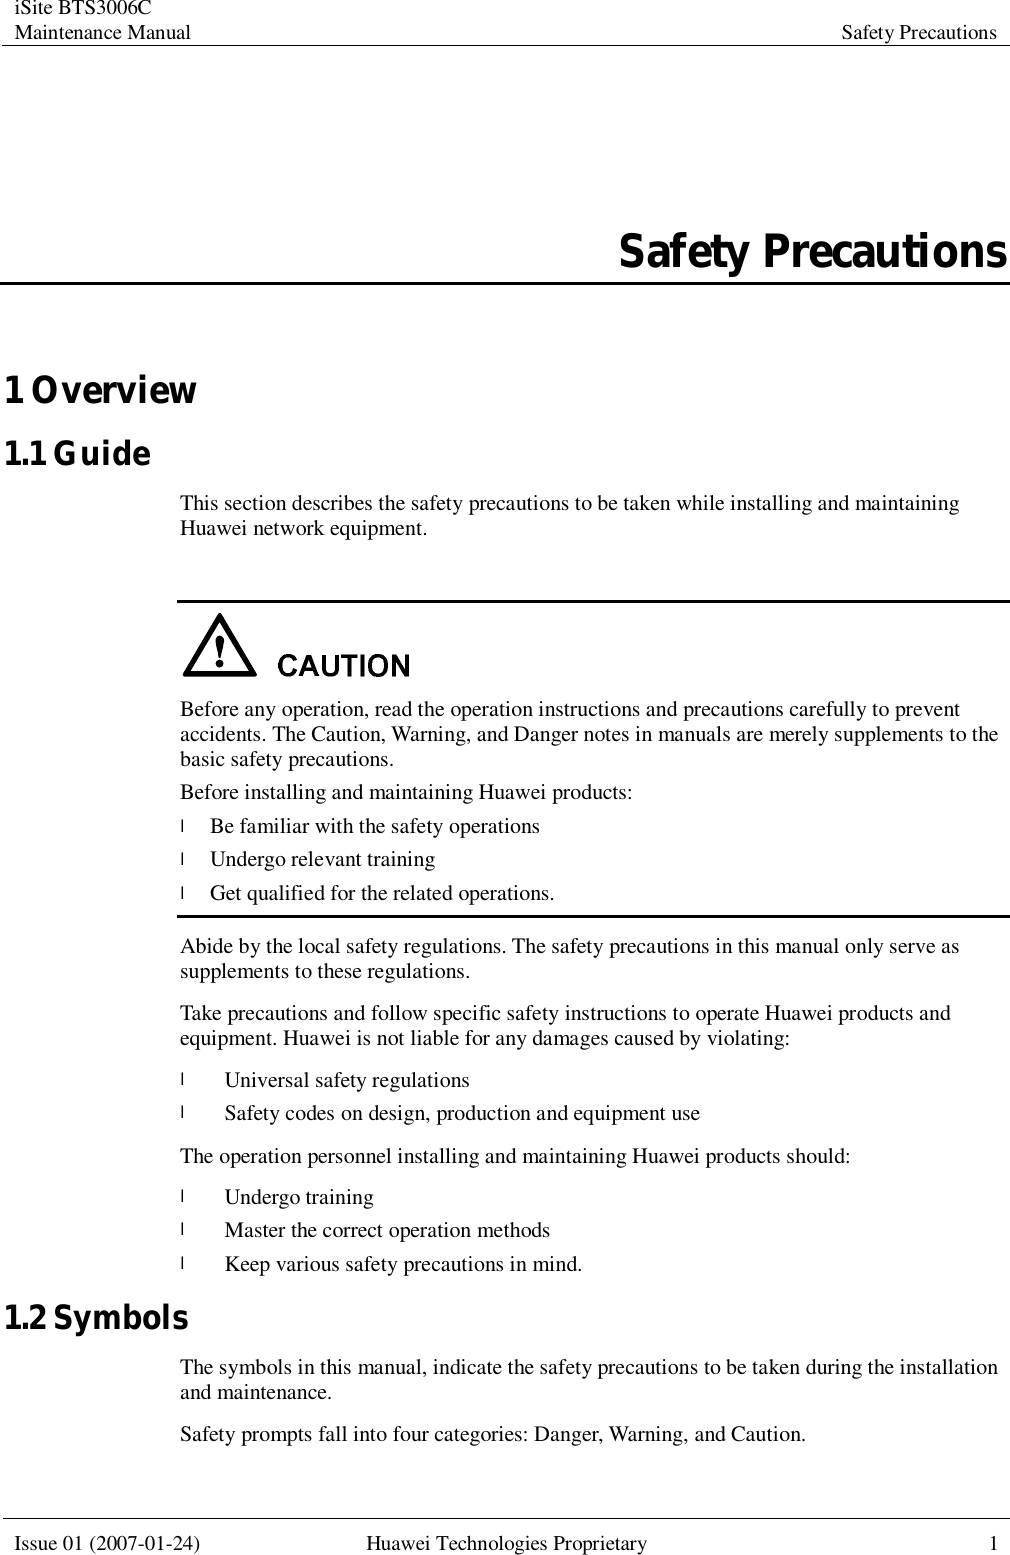 iSite BTS3006C Maintenance Manual Safety Precautions  Issue 01 (2007-01-24) Huawei Technologies Proprietary 1  Safety Precautions 1 Overview 1.1 Guide This section describes the safety precautions to be taken while installing and maintaining Huawei network equipment.   Before any operation, read the operation instructions and precautions carefully to prevent accidents. The Caution, Warning, and Danger notes in manuals are merely supplements to the basic safety precautions.  Before installing and maintaining Huawei products: l Be familiar with the safety operations l Undergo relevant training l Get qualified for the related operations. Abide by the local safety regulations. The safety precautions in this manual only serve as supplements to these regulations. Take precautions and follow specific safety instructions to operate Huawei products and equipment. Huawei is not liable for any damages caused by violating: l Universal safety regulations l Safety codes on design, production and equipment use The operation personnel installing and maintaining Huawei products should: l Undergo training l Master the correct operation methods l Keep various safety precautions in mind. 1.2 Symbols The symbols in this manual, indicate the safety precautions to be taken during the installation and maintenance. Safety prompts fall into four categories: Danger, Warning, and Caution.  